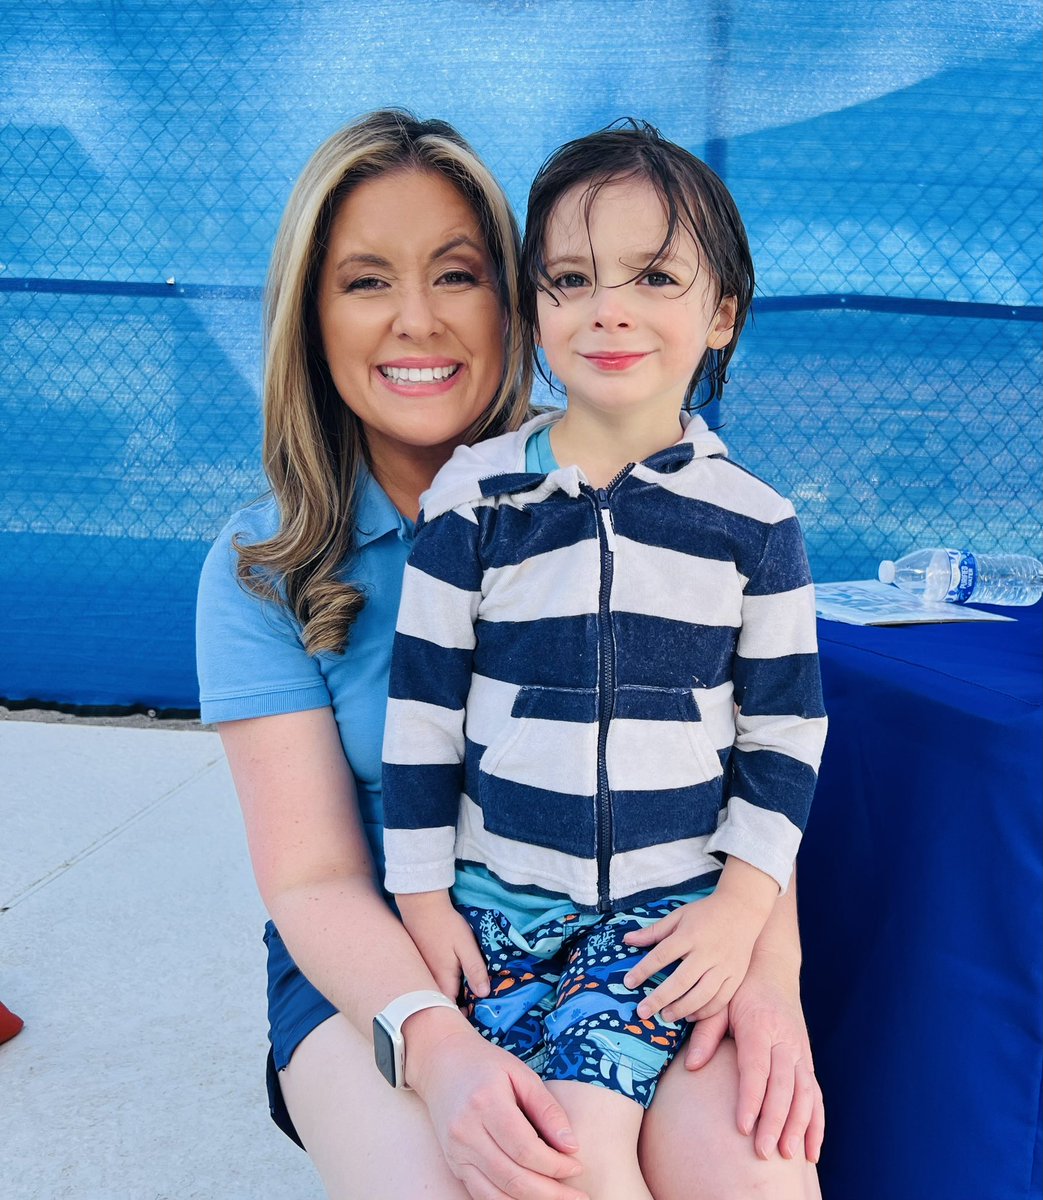 This little one just wrapped up his swim lesson during our News 4 Tucson Swimfest event! Our next Swimfest will be at Ott YMCA on June 6! @KVOA @TucsonYMCA #Lifesaver #swimsafety